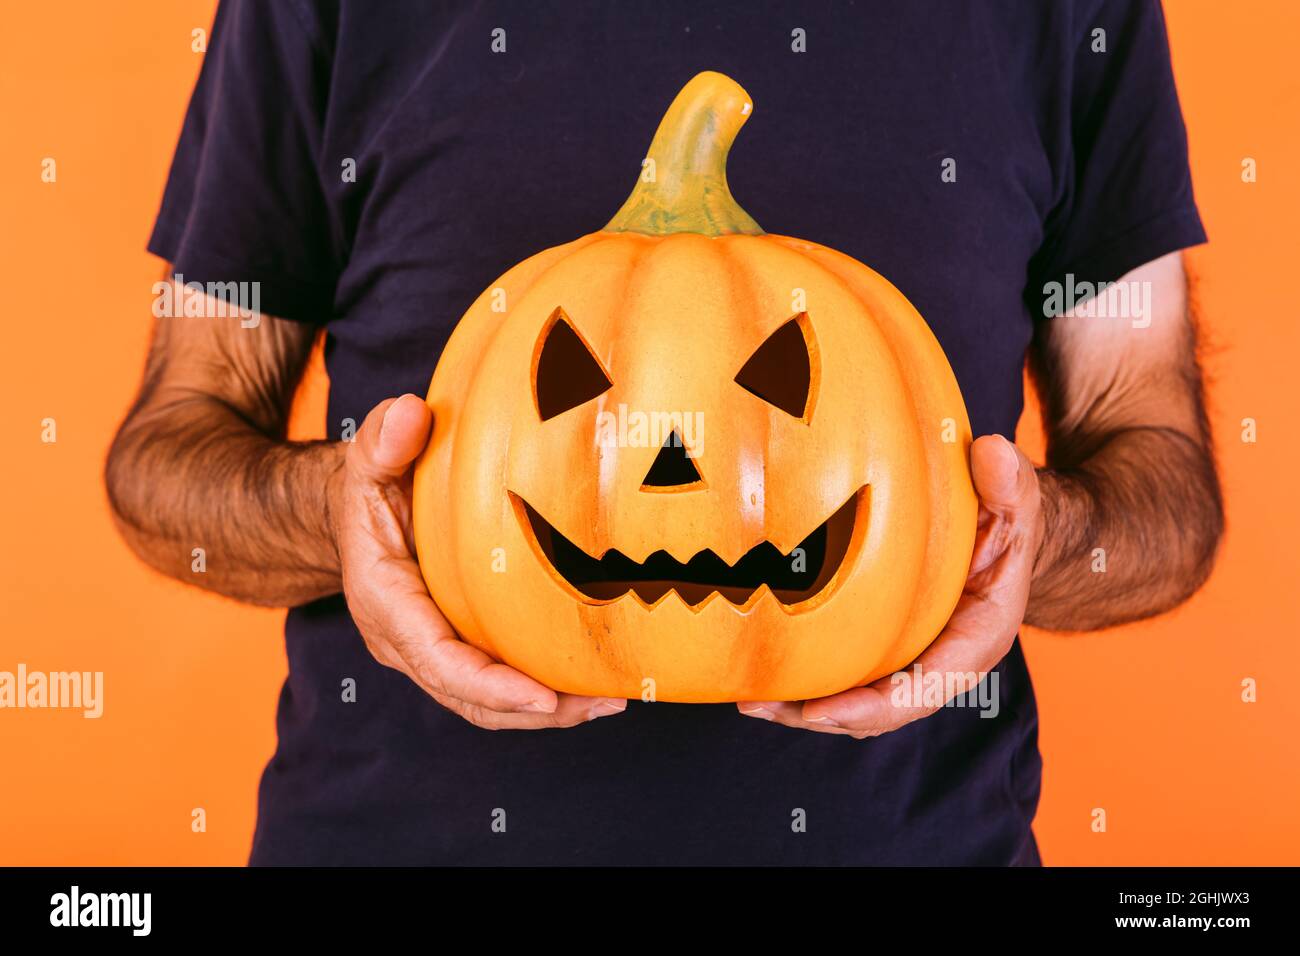 Detail of a terrifying pumpkin 'Jack-o-lantern' held by hands on an orange background. Halloween and days of the dead concept. Stock Photo